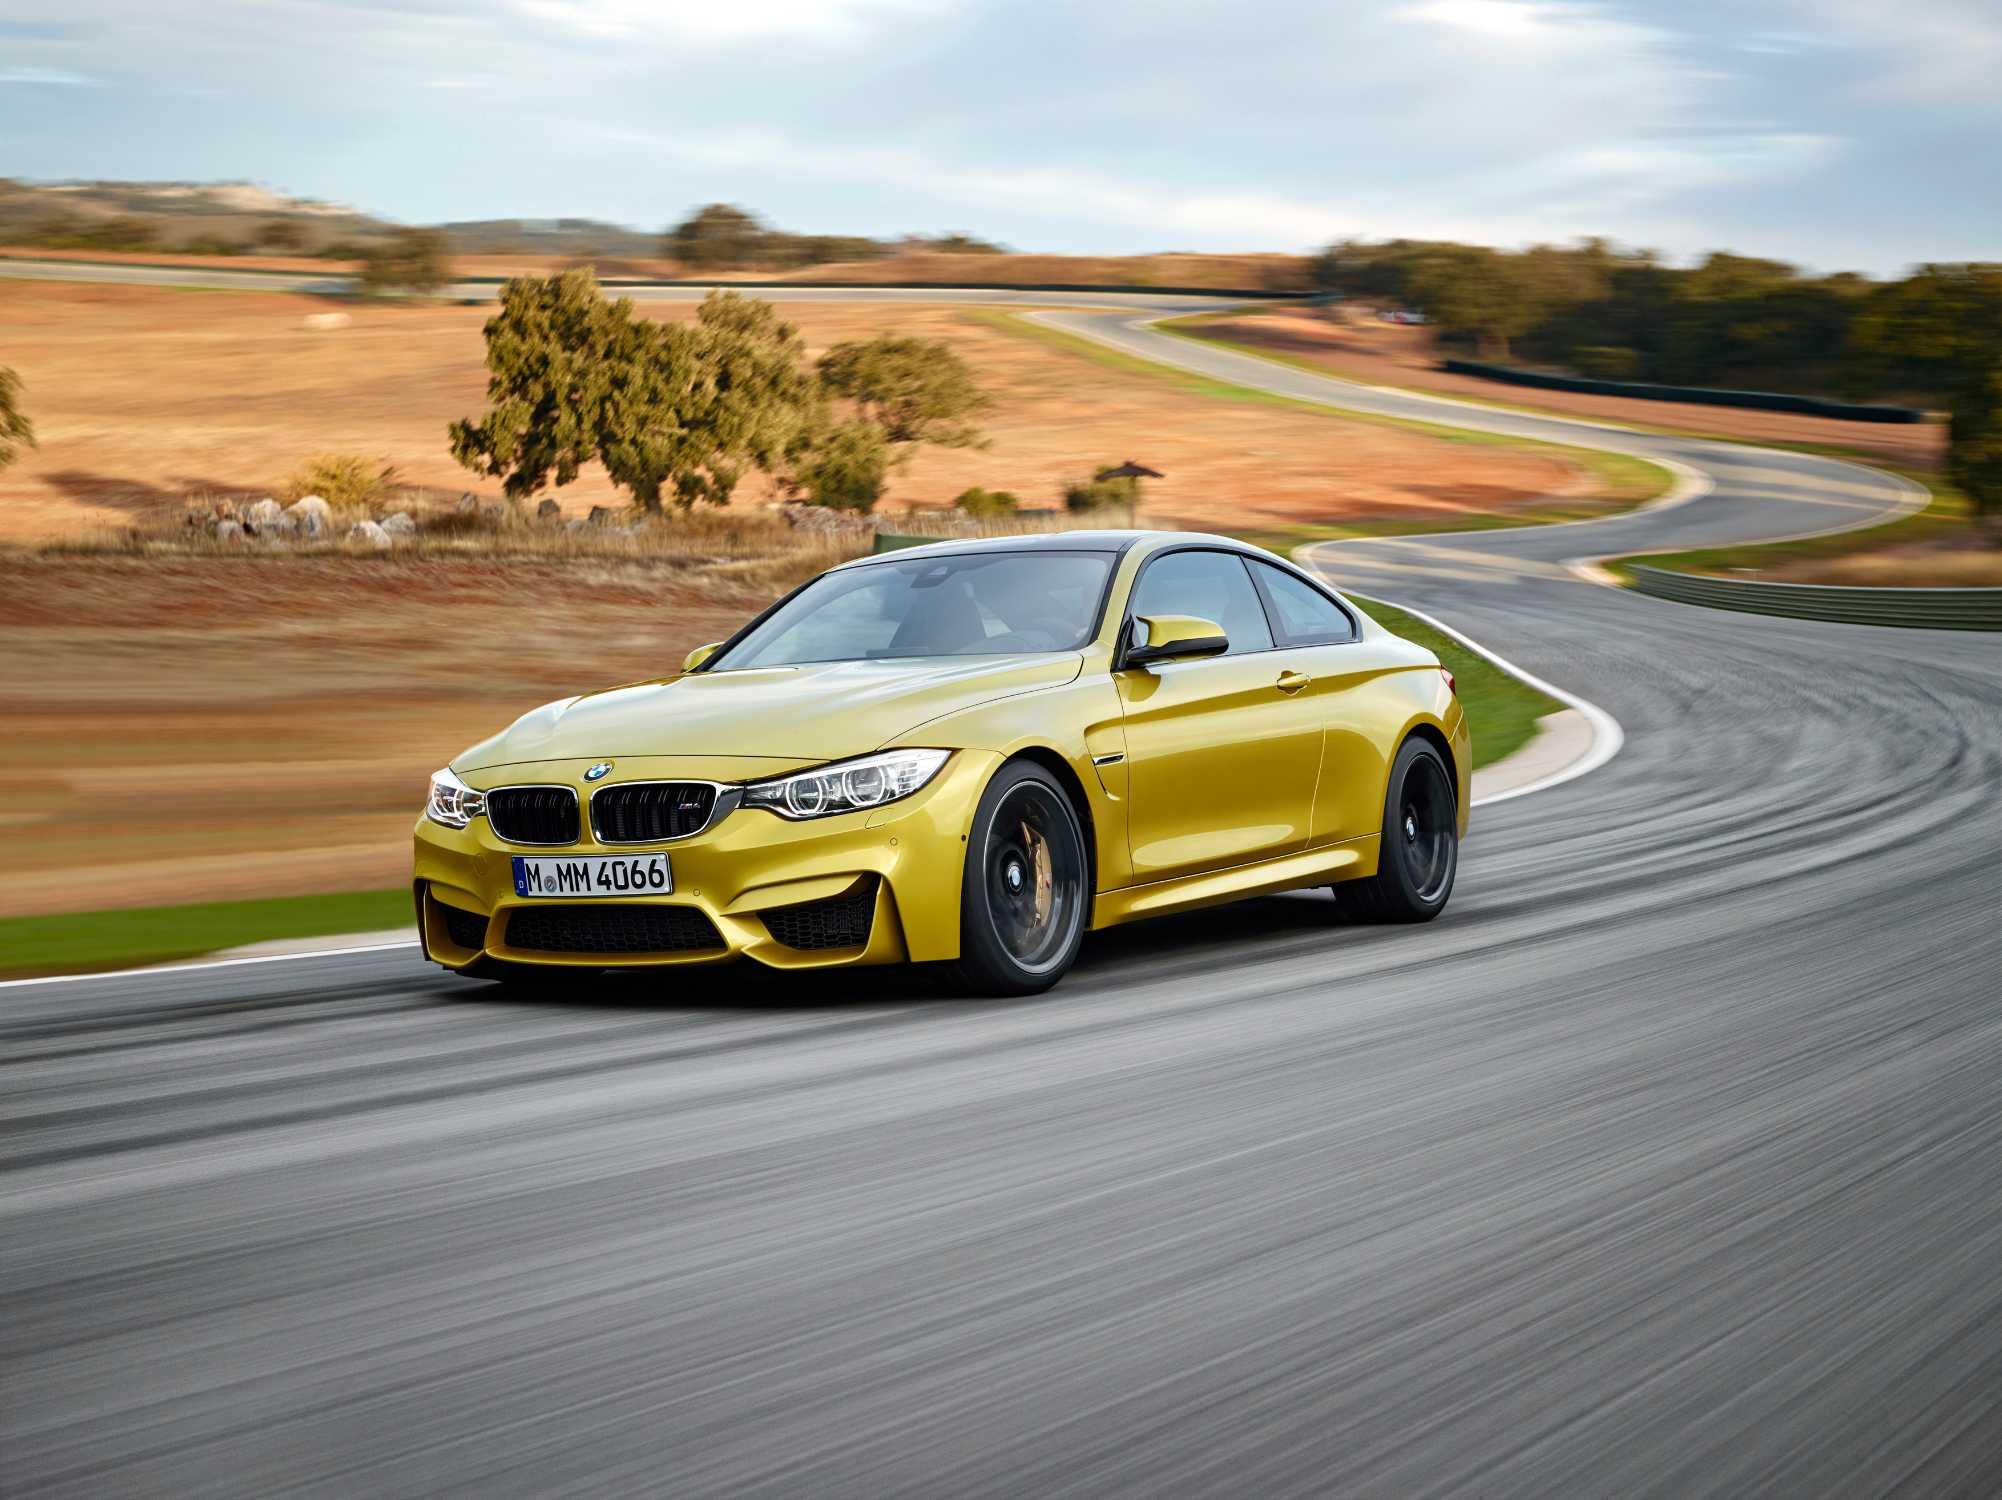 The all-new BMW M4 Coupé, Austin Yellow Metallic. 19“ M Light Alloy Wheels Double-Spoke Style 437 M, Jet Black, Forged and Polished, M Carbon Ceramic Brake. © BMW AG 12/2013